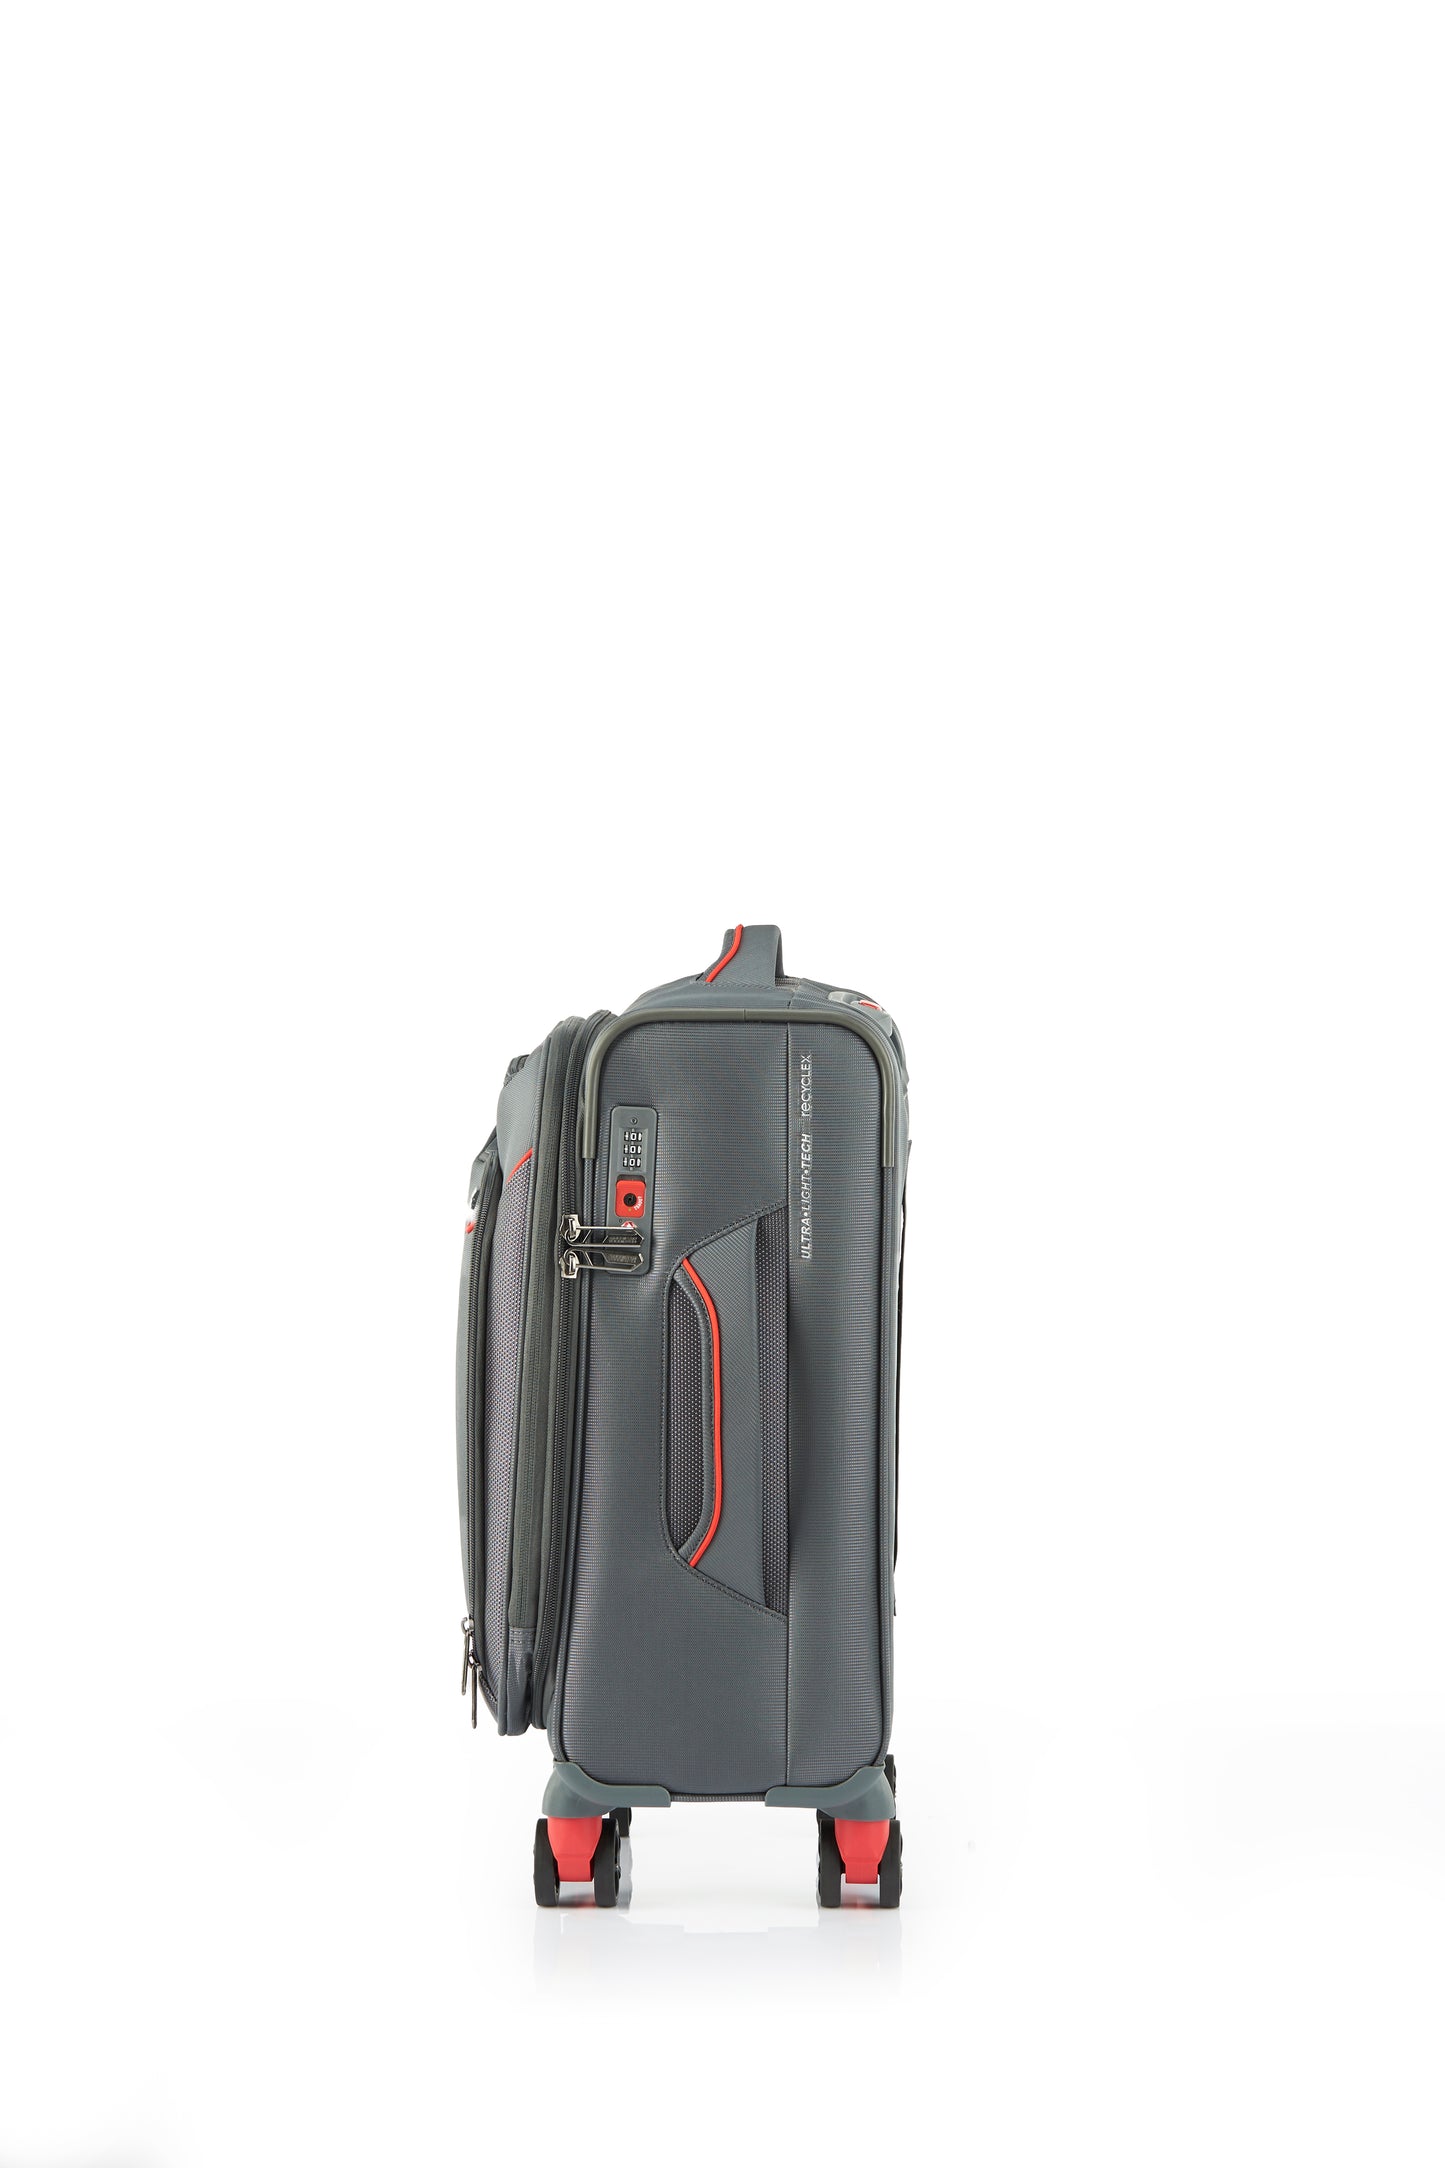 AMERICAN TOURISTER APPLITE 4 ECO 55CM SPINNER GREY/RED